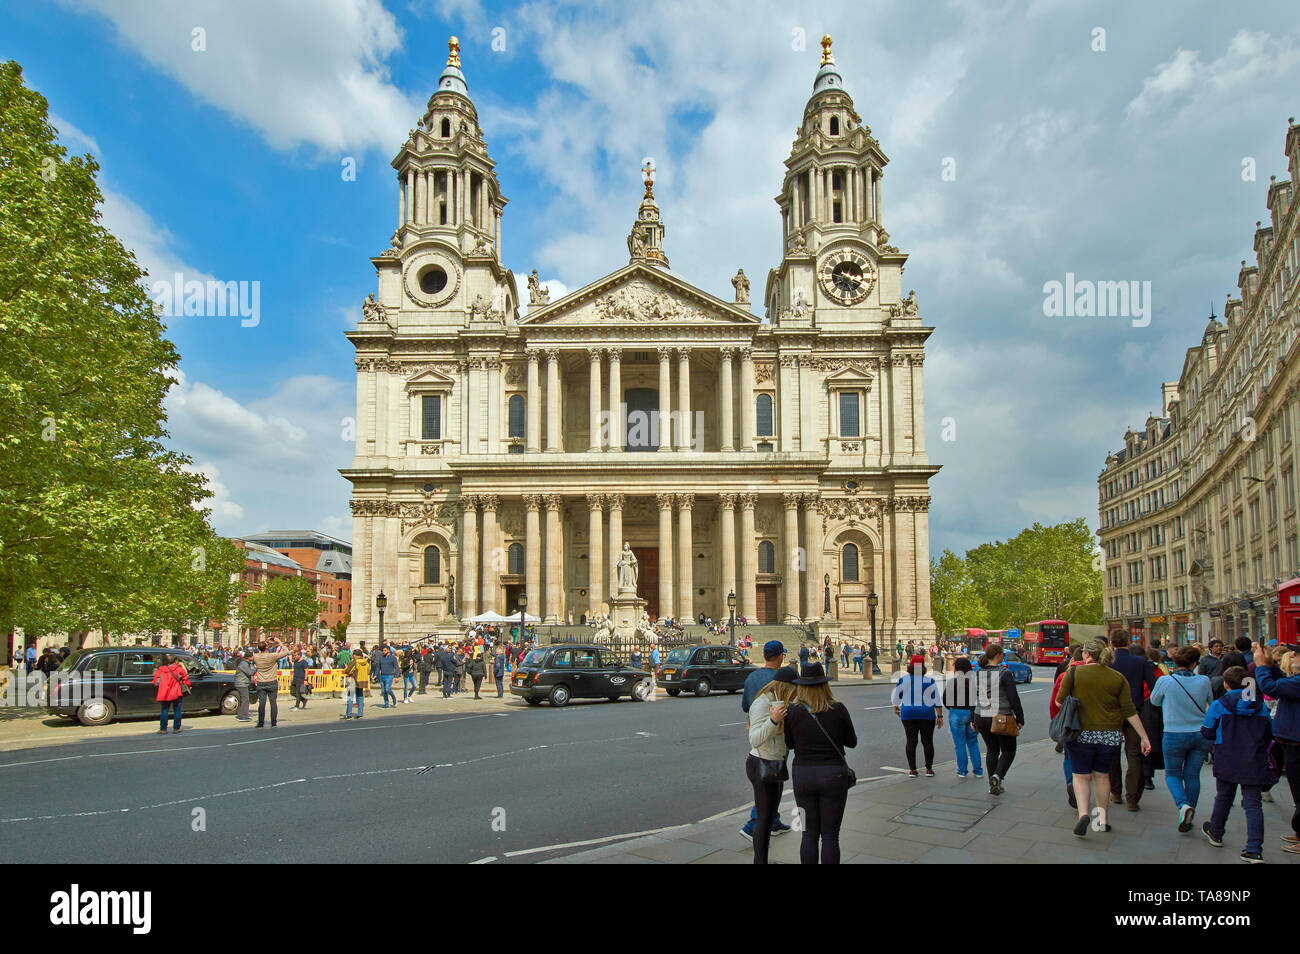 LONDON ST PAULS CATHEDRAL WITH PEOPLE ON THE PAVEMENTS AND WAITING TAXIS OR BLACK CABS Stock Photo